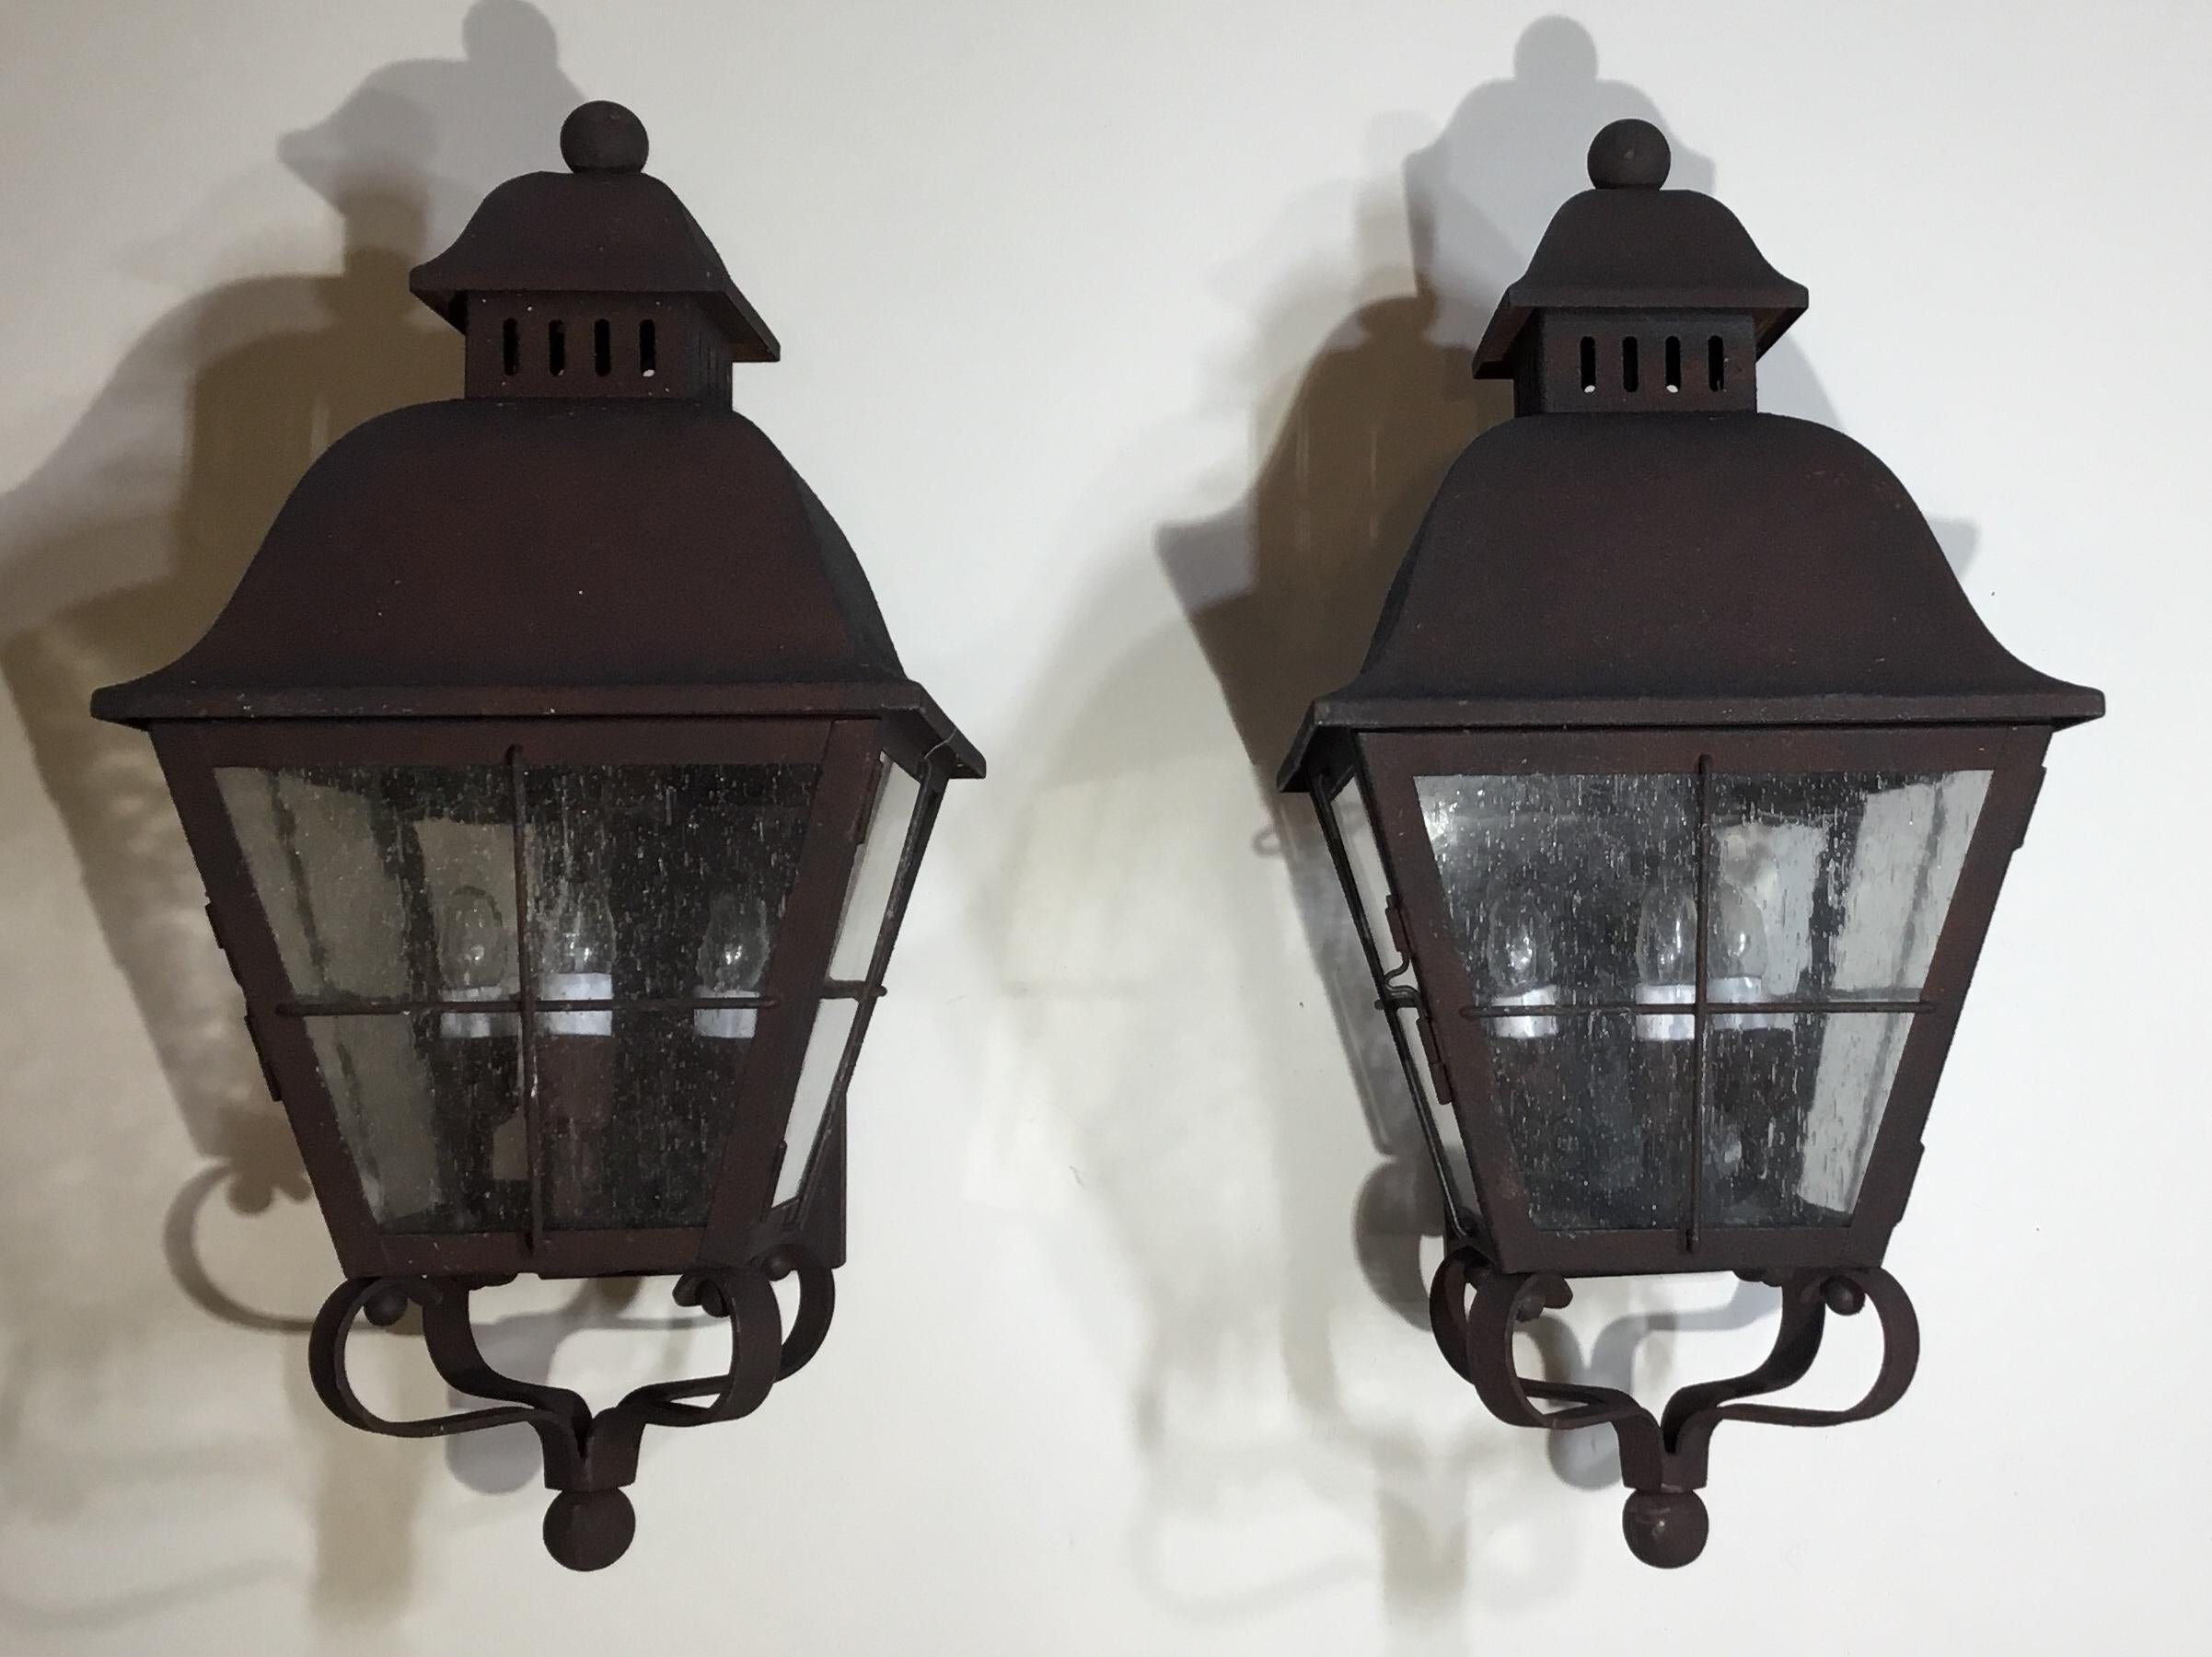 Elegant pair of wall hanging lantern ,hand forged from solid brass and have professionally rust finish applied, seeded glass, electrified with three 40/watt lights each, up to US code, UL approved. Great decorative pair of lantern for the front of